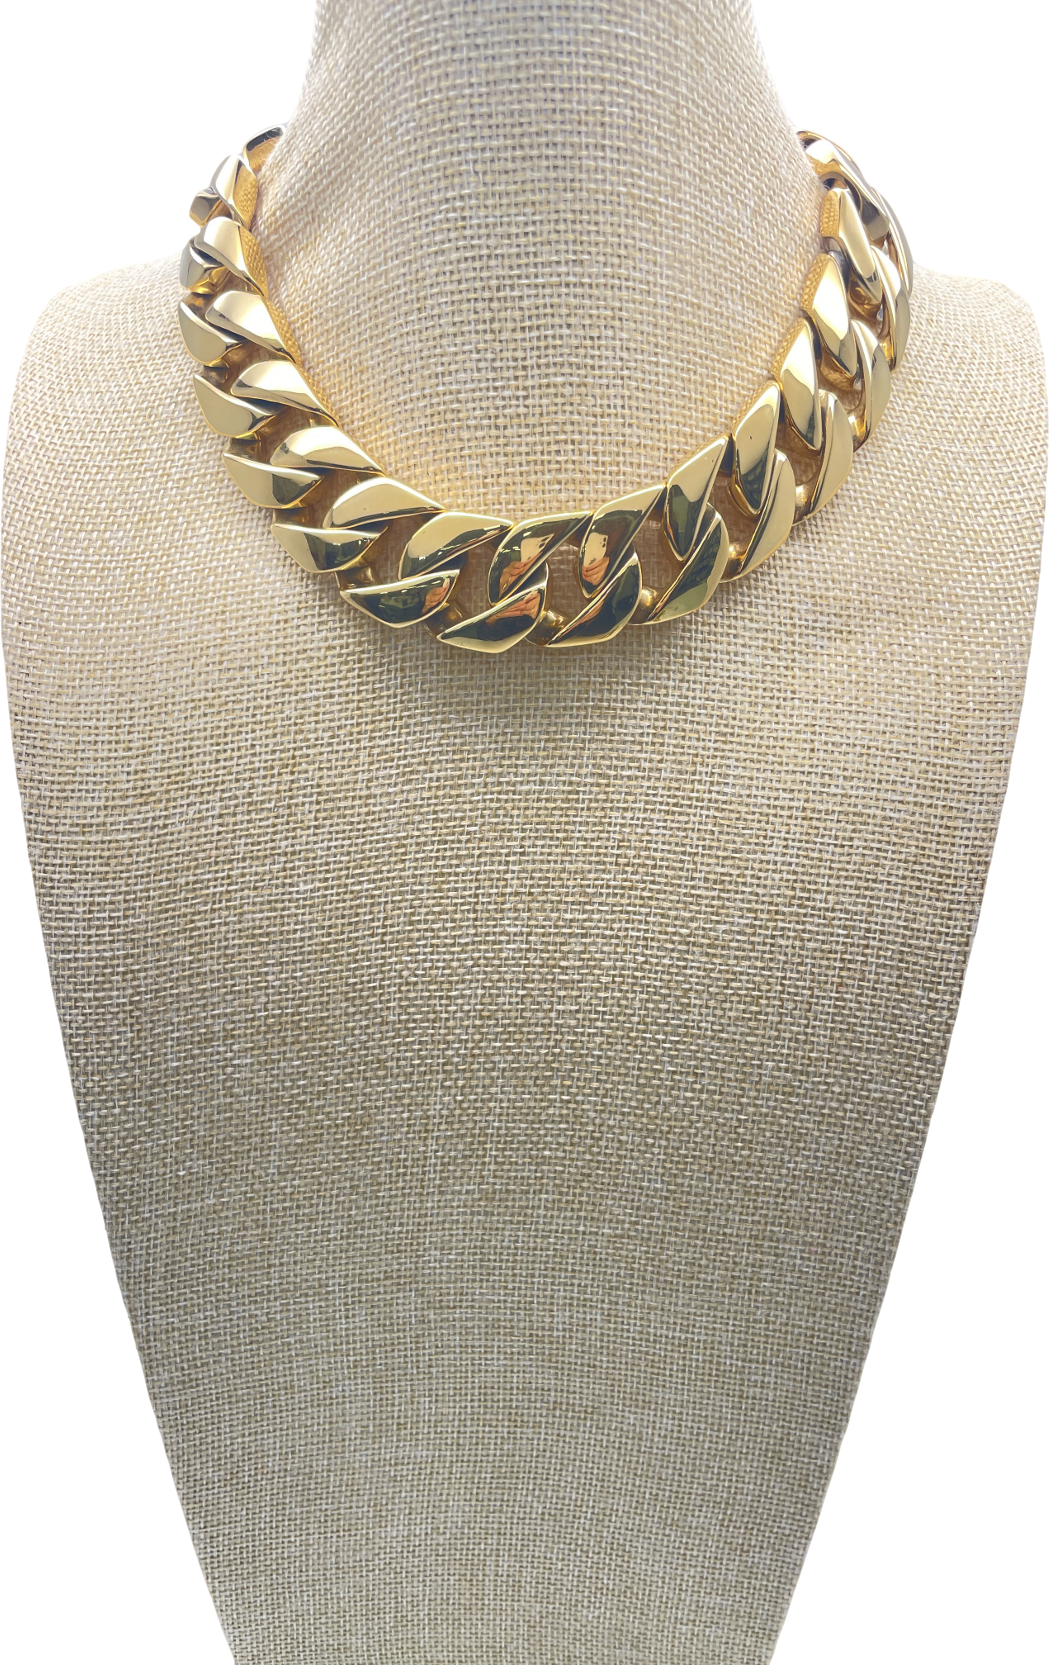 By Anisa Sojka Yellow Gold 24k Plated Chunky Chain Necklace